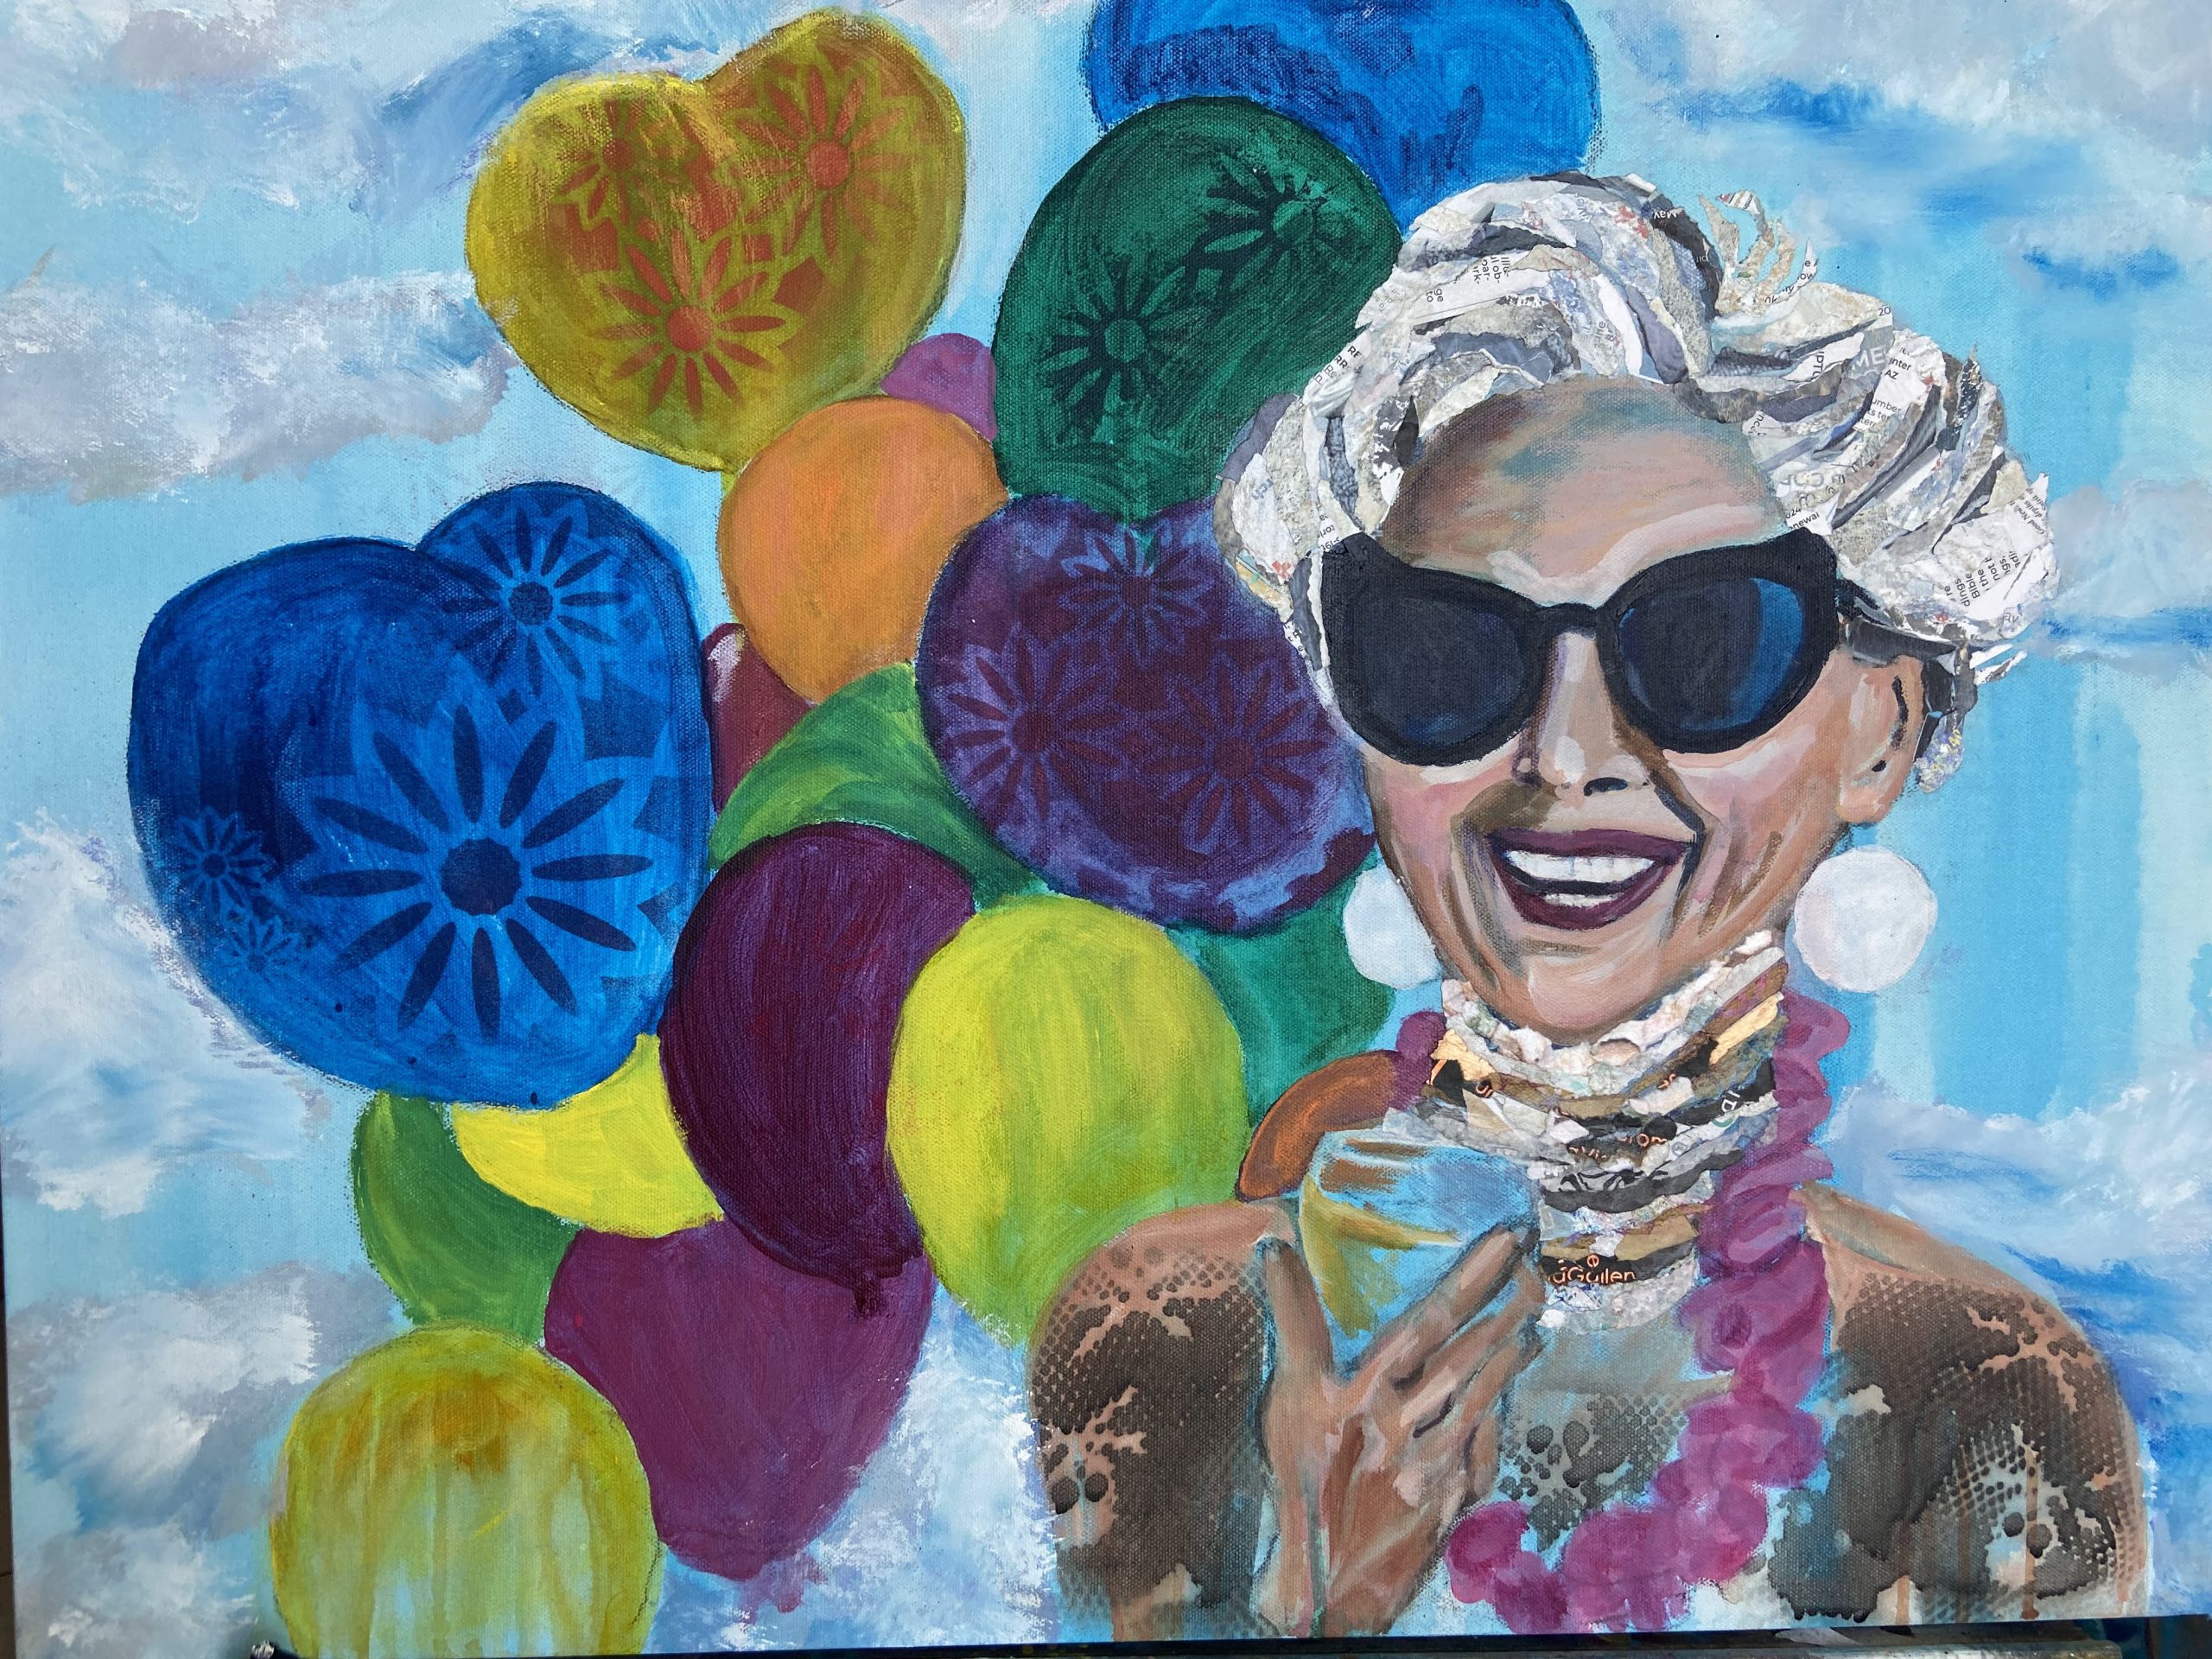 Painting of a happy senior lady smiling and holding a glass of wine against a backdrop of balloons. Her hair and necklaces are done in paper collage. 